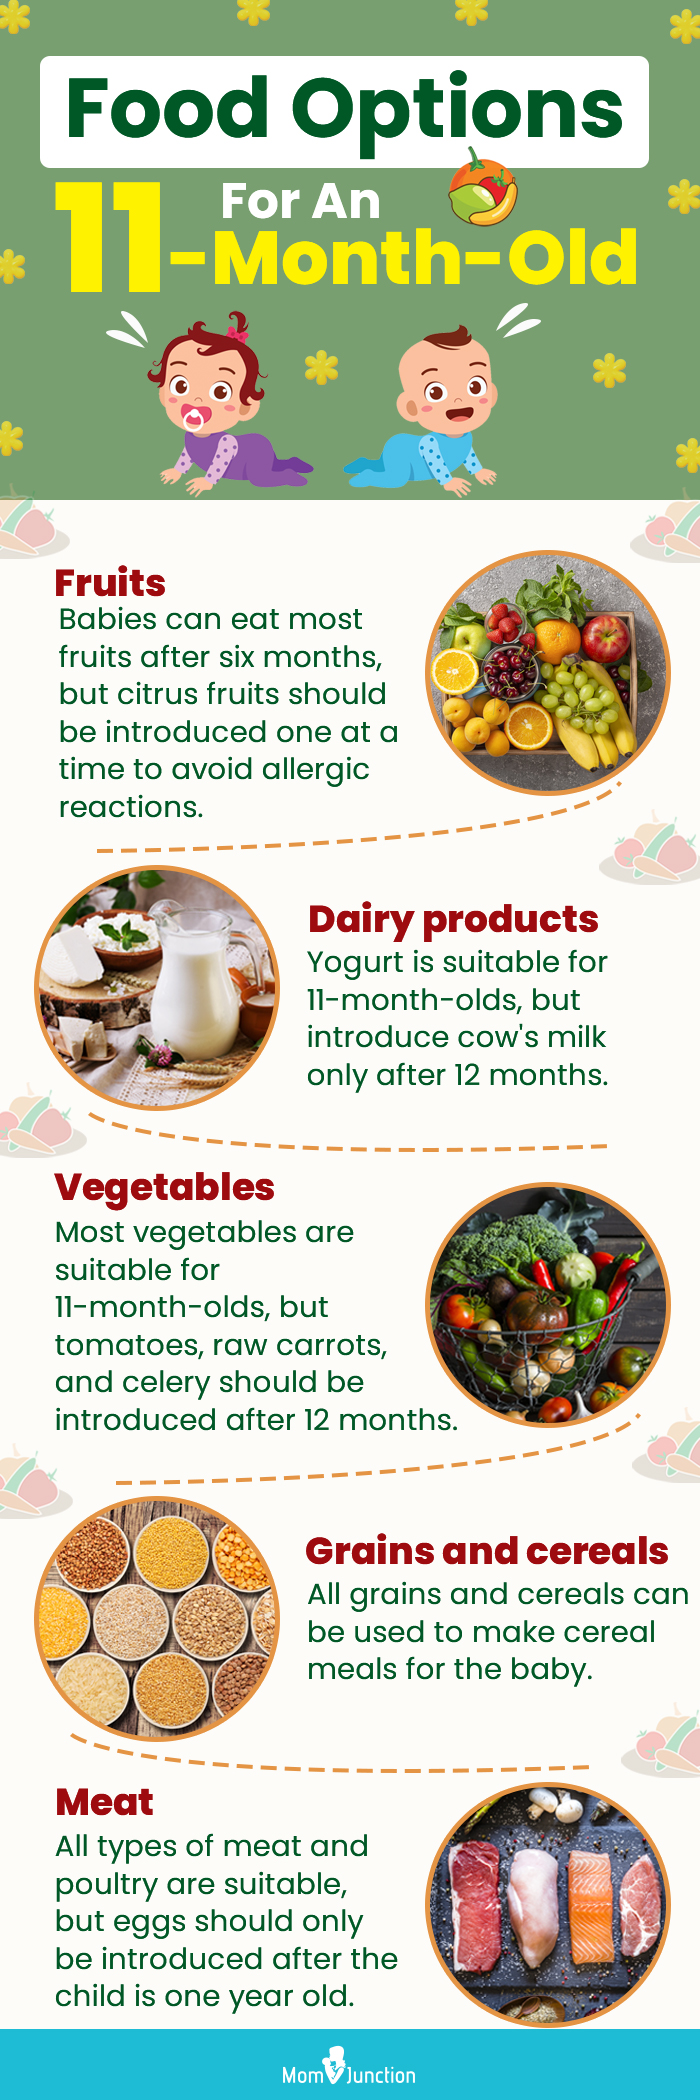 food options for an 11 month old (infographic)